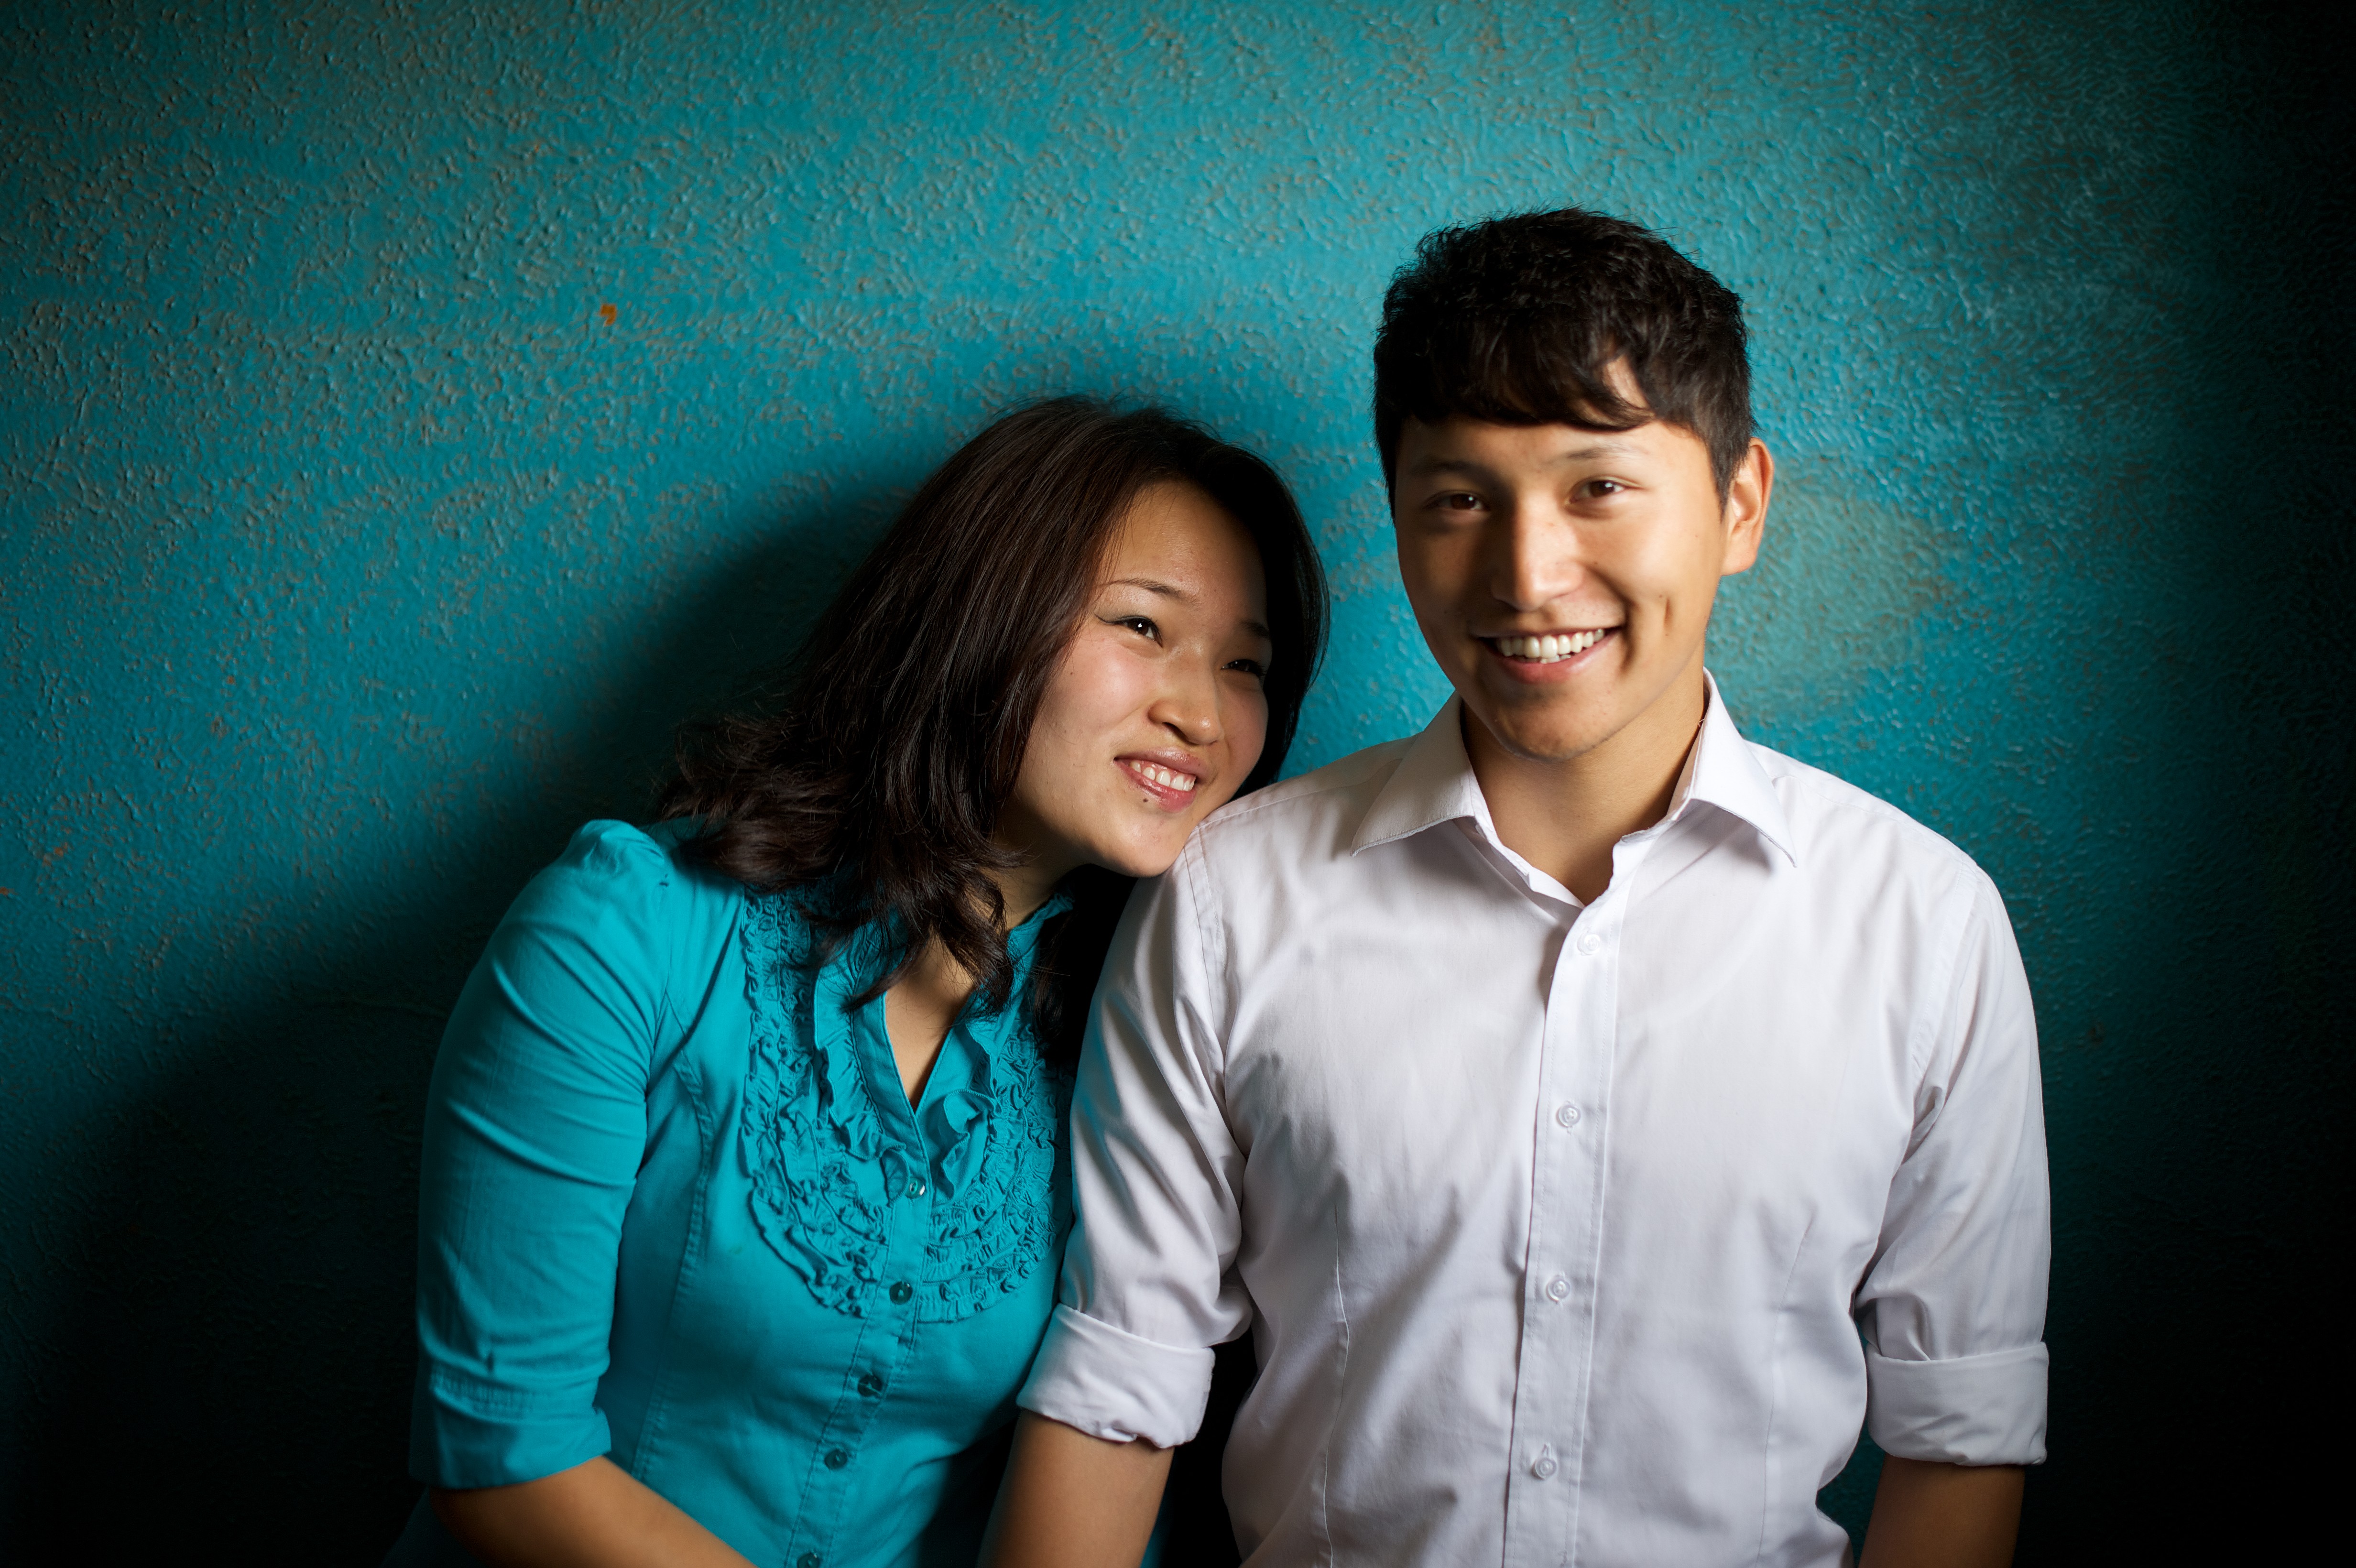 A portrait of a woman in a blue blouse and her husband in a button-up shirt, with a blue background.